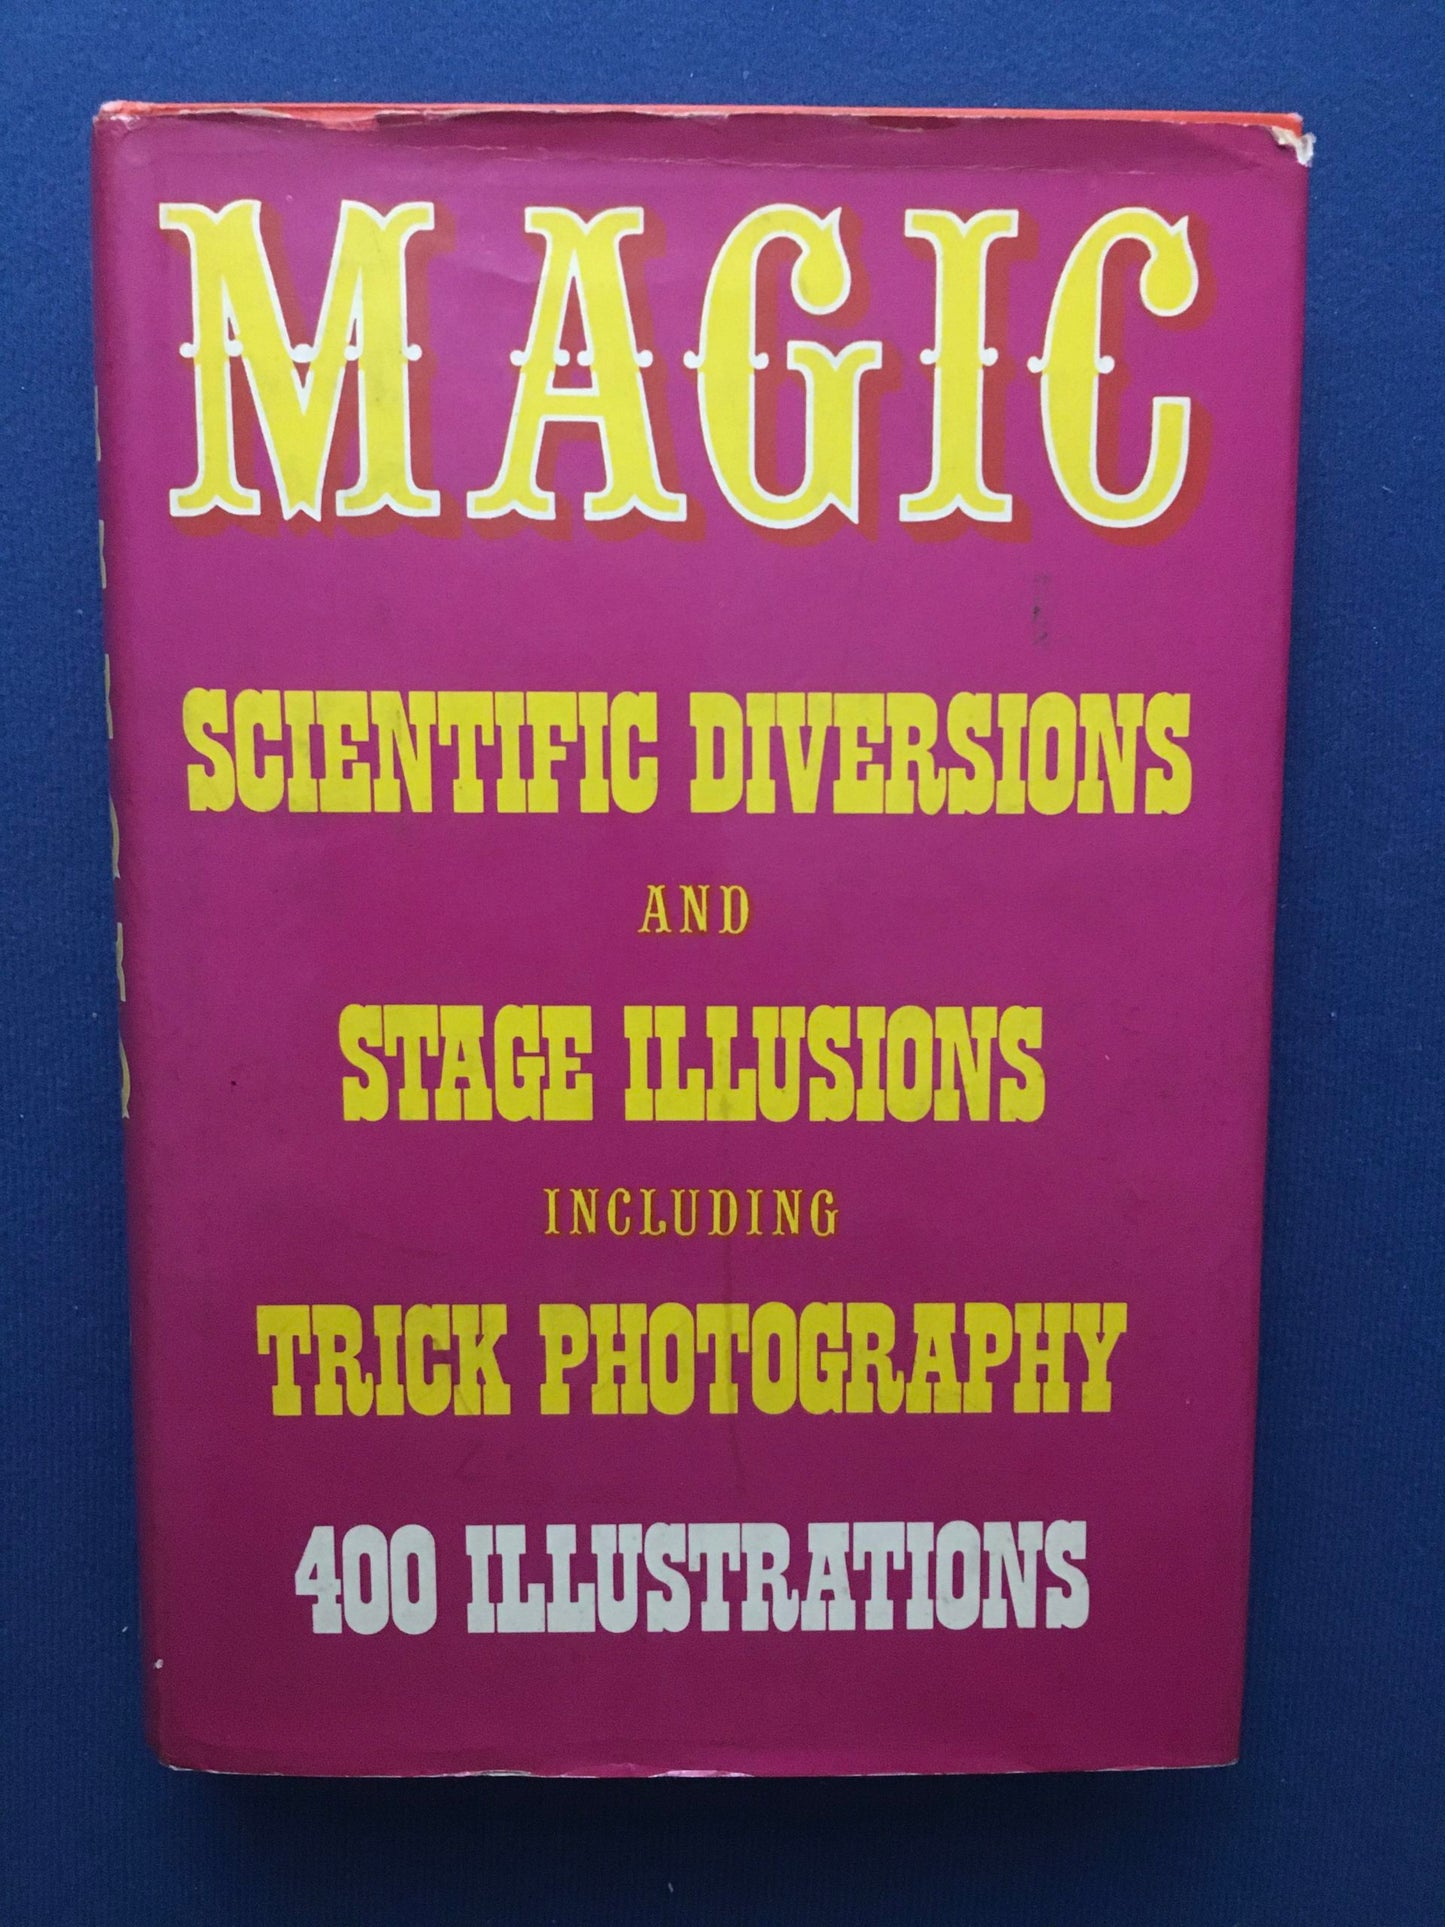 Magic, scientific diversions and Stage Illusions including Trick Photography